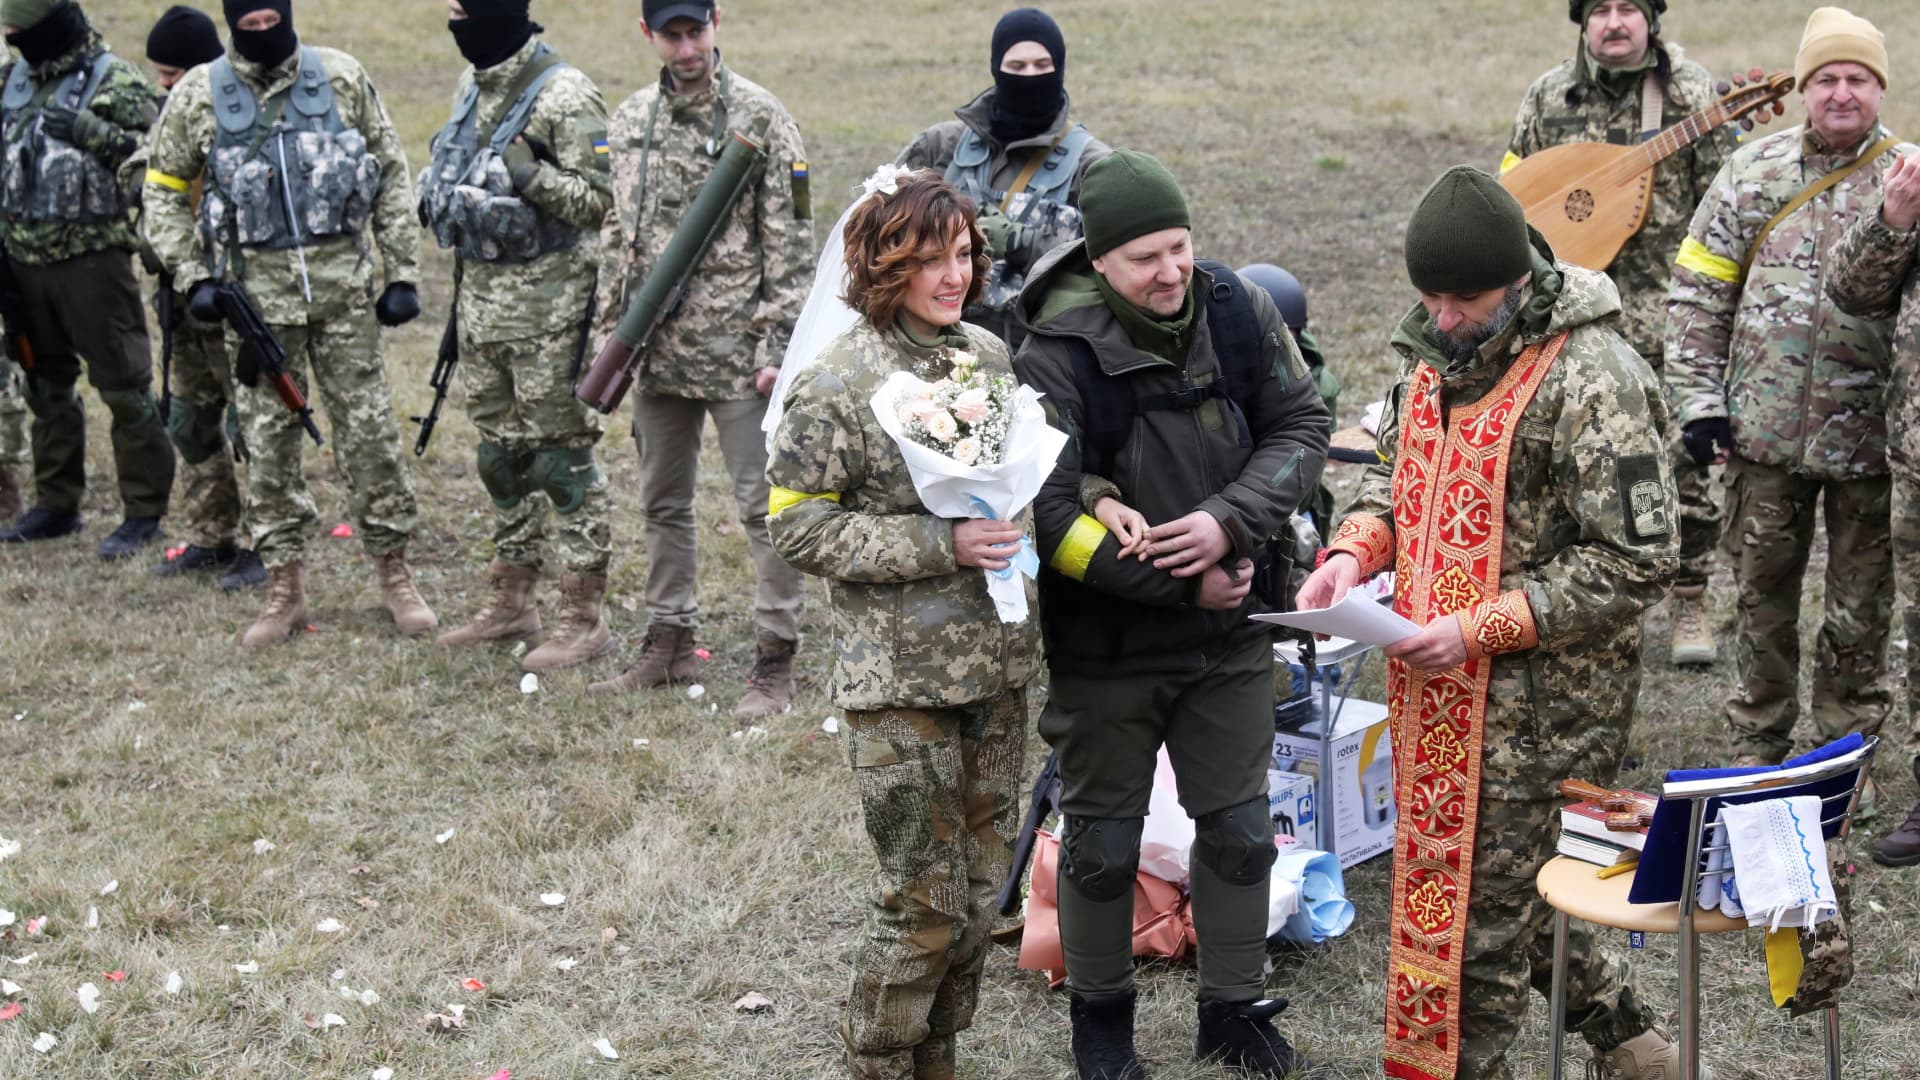 Members of the Ukrainian Territorial Defence Forces Lesia Ivashchenko and Valerii Fylymonov listen to a priest at their wedding during Ukraine-Russia conflict, at a checkpoint in Kyiv, Ukraine March 6, 2022. 